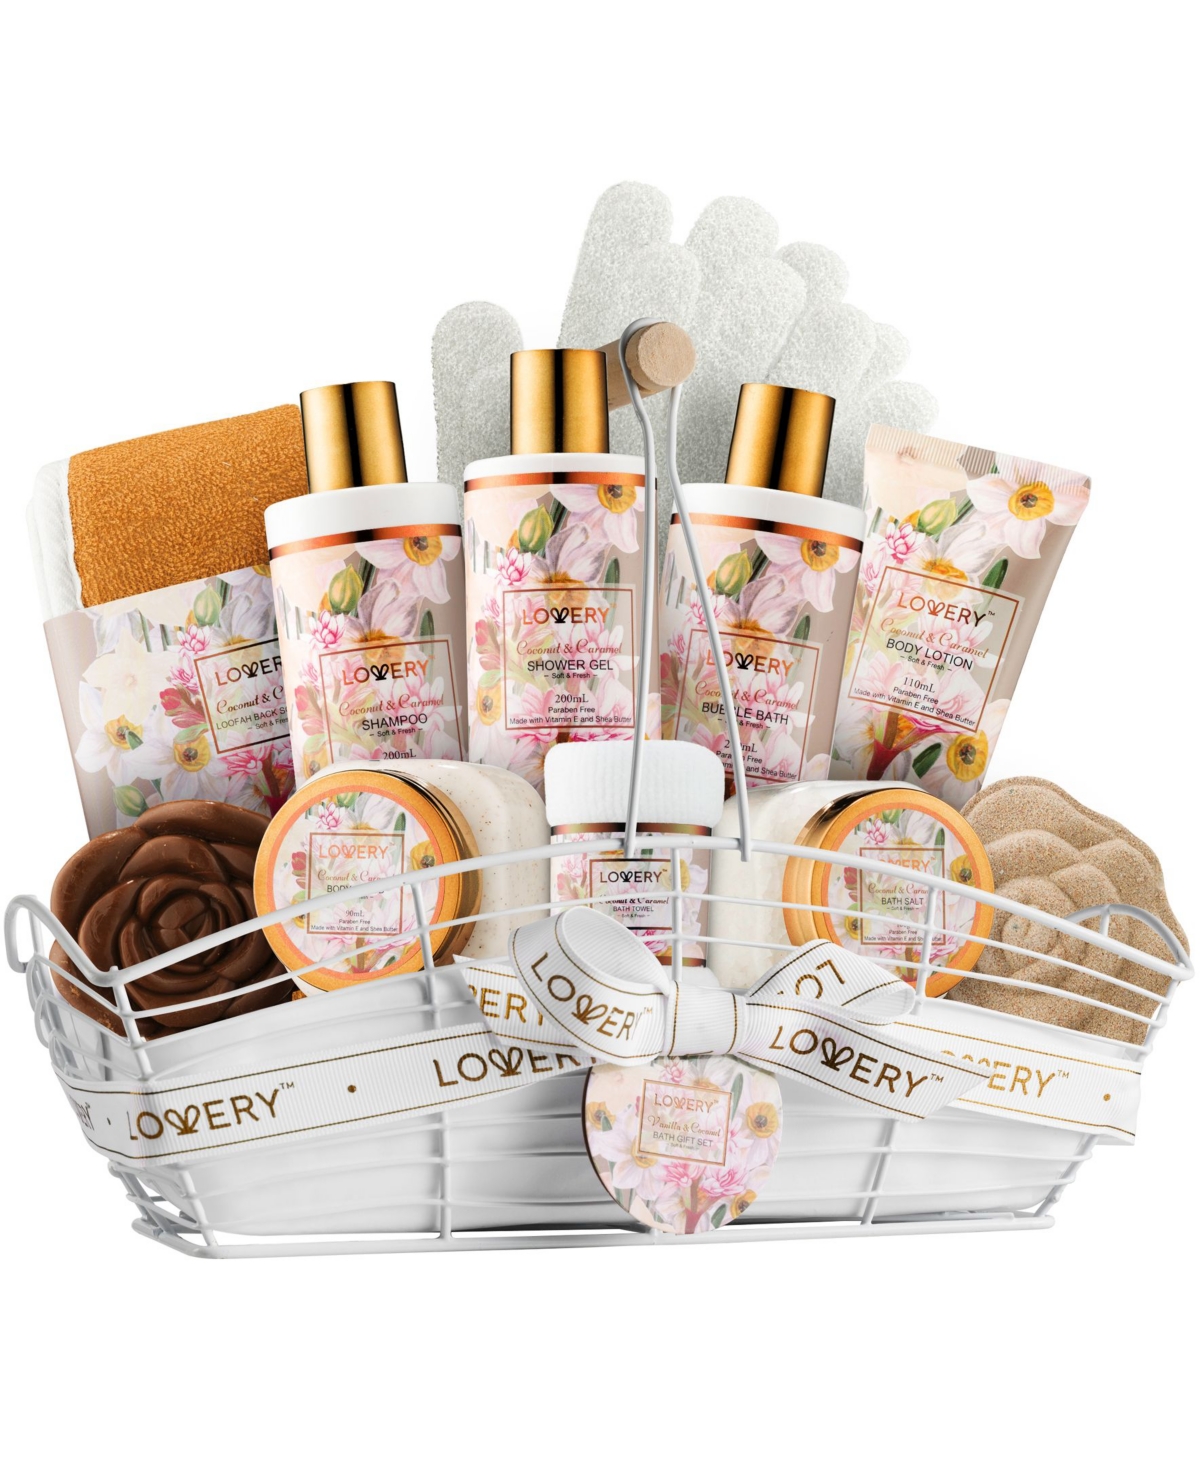 Lovery Coconut Caramel Spa Gift Basket and Body Care Gift Set, Self Care Package, 13 Piece